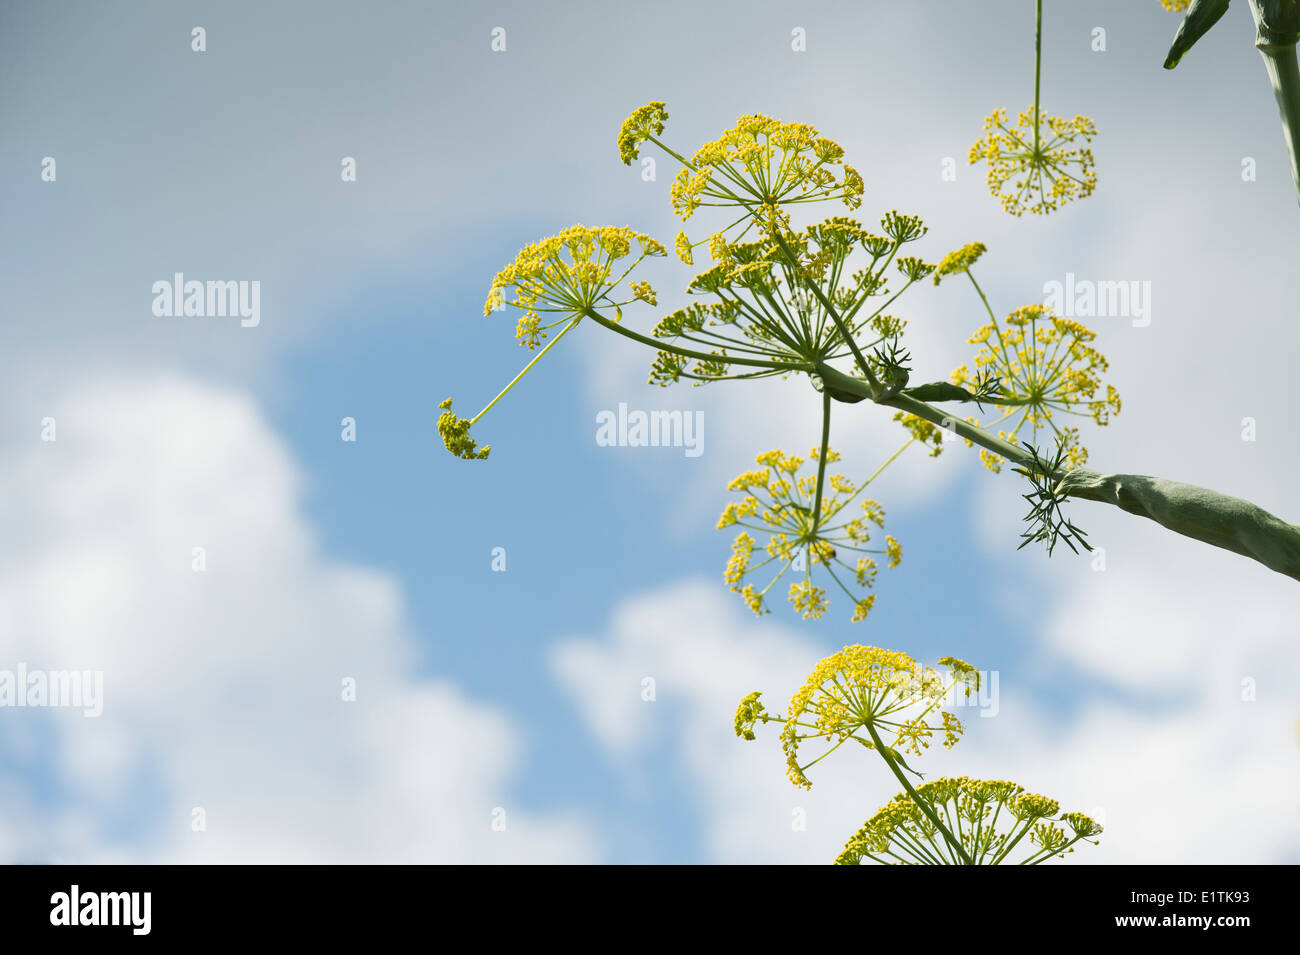 Angelica archangelica. Angelica flowering against a blue cloudy sky Stock Photo